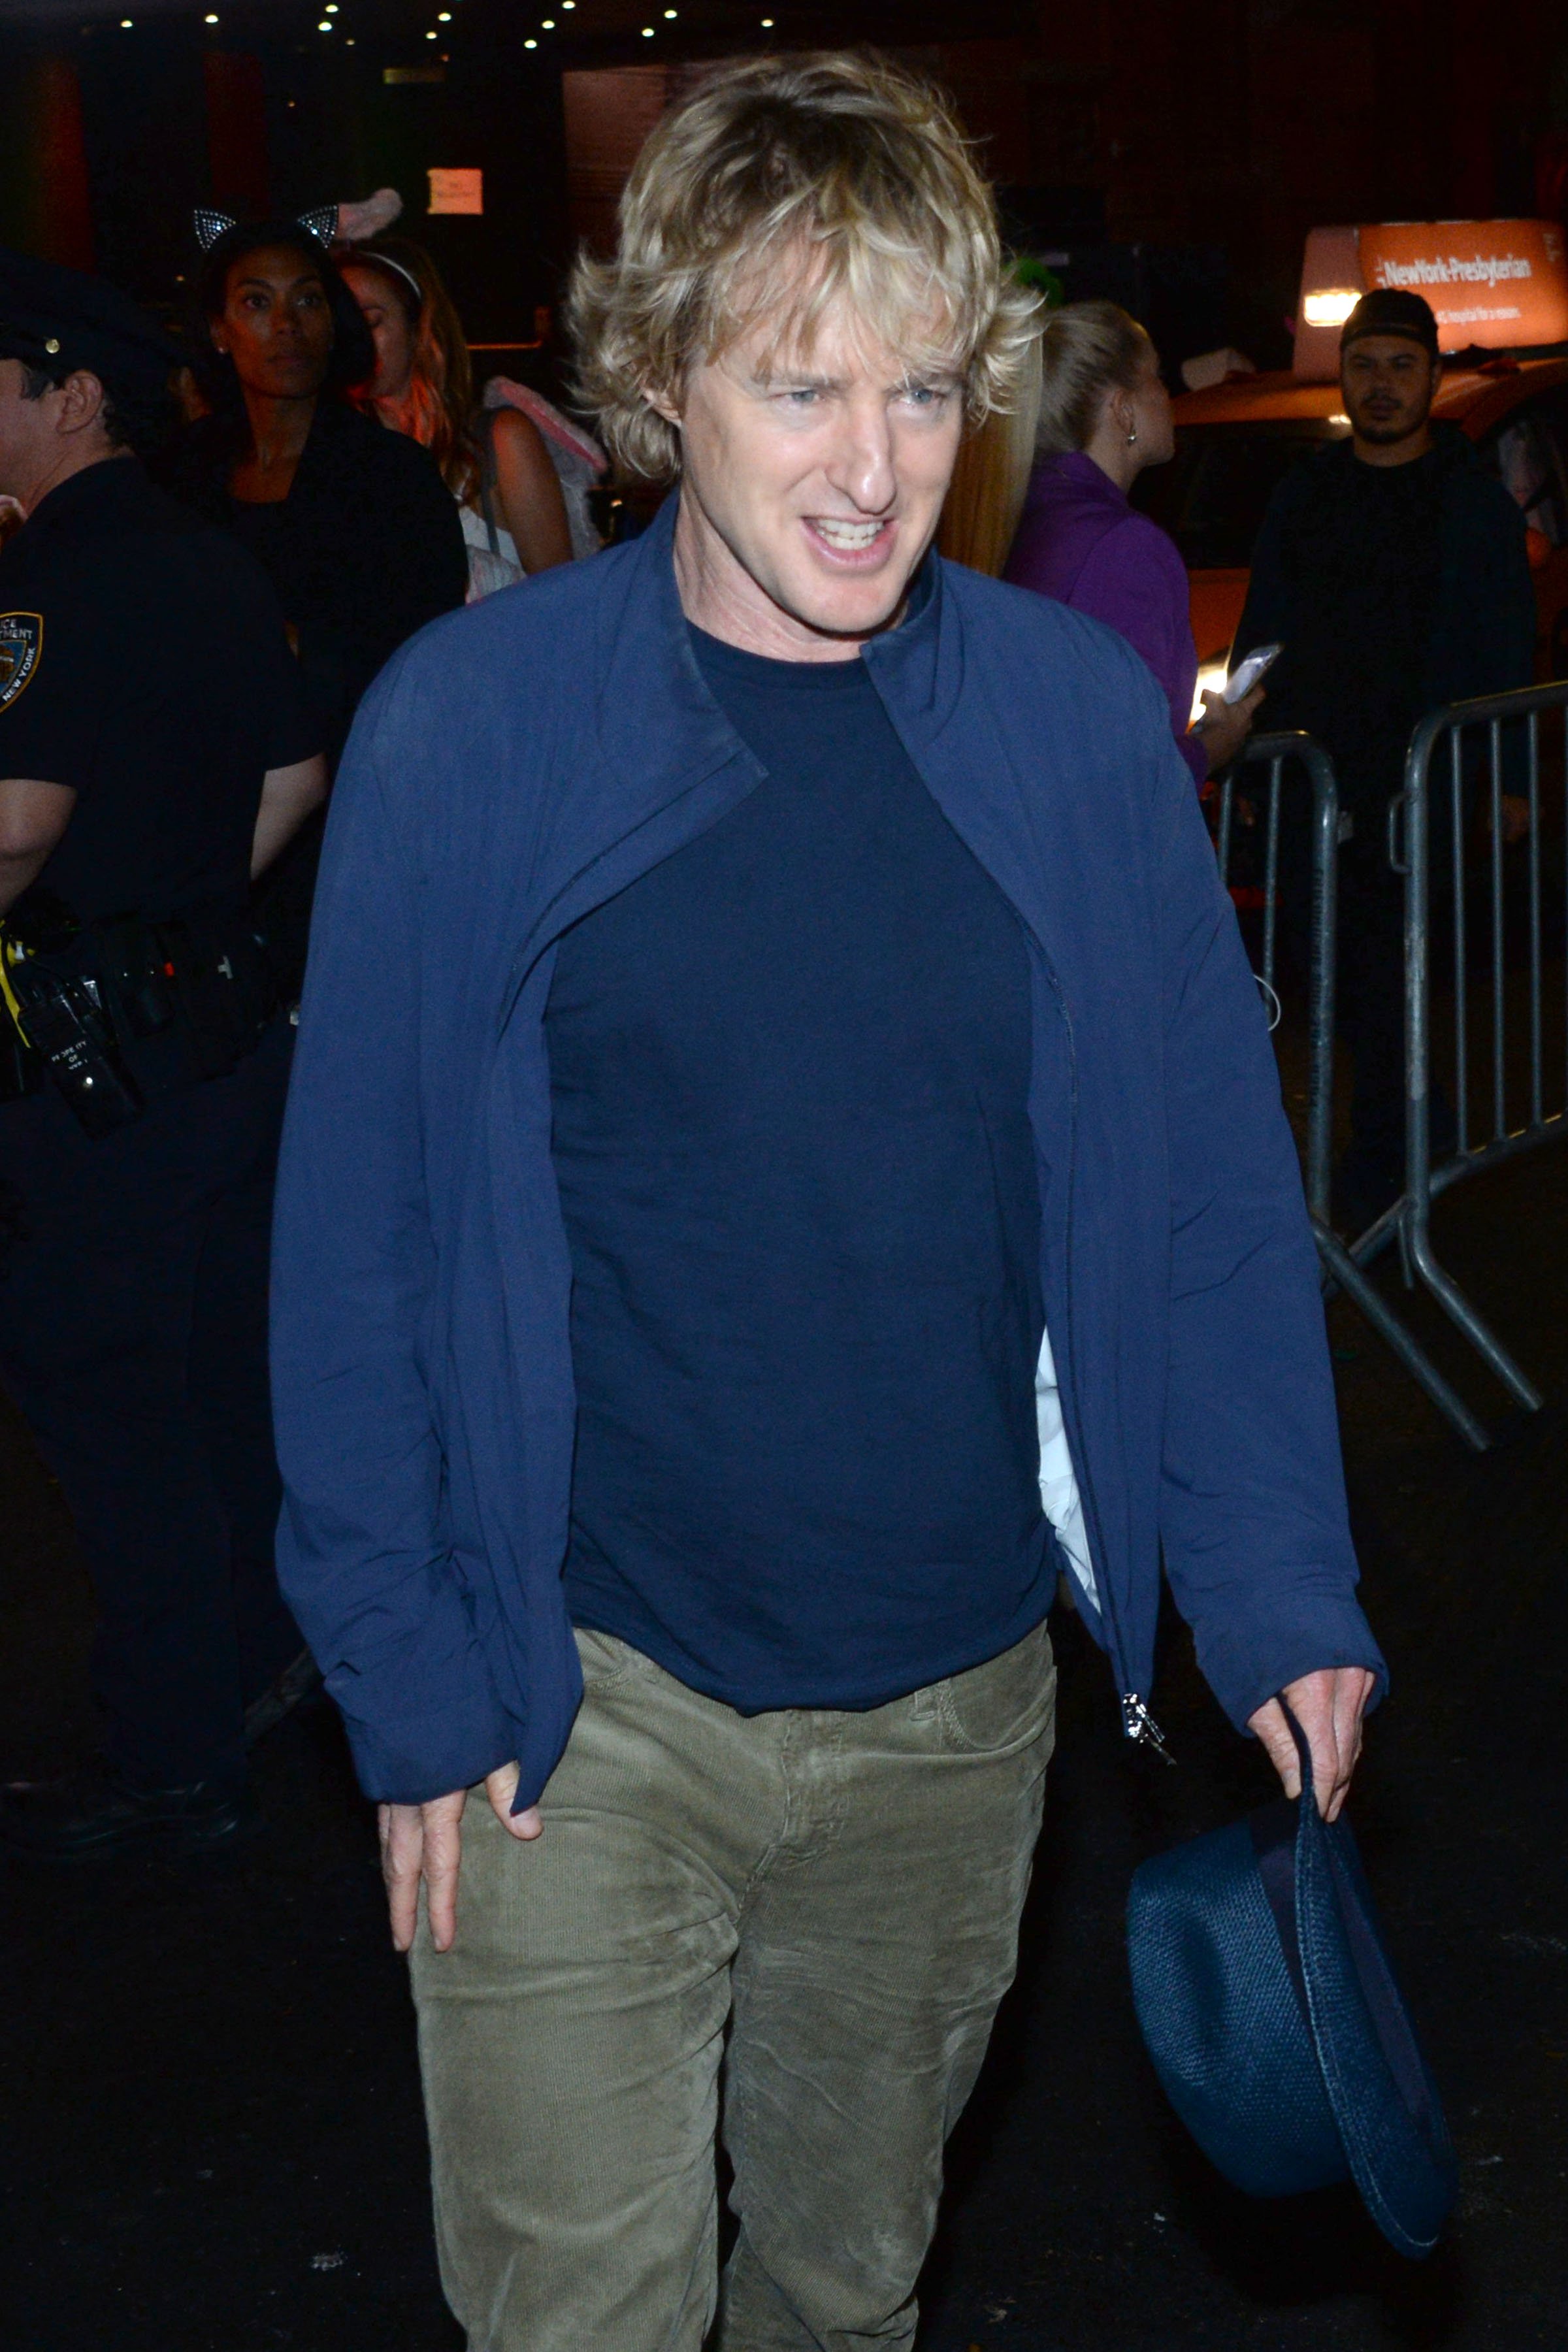 Owen Wilson besucht Heidi Klums 20th Annual Halloween Party im The Cathedral am 31. Oktober 2019 in New York City. | Quelle: Getty Images